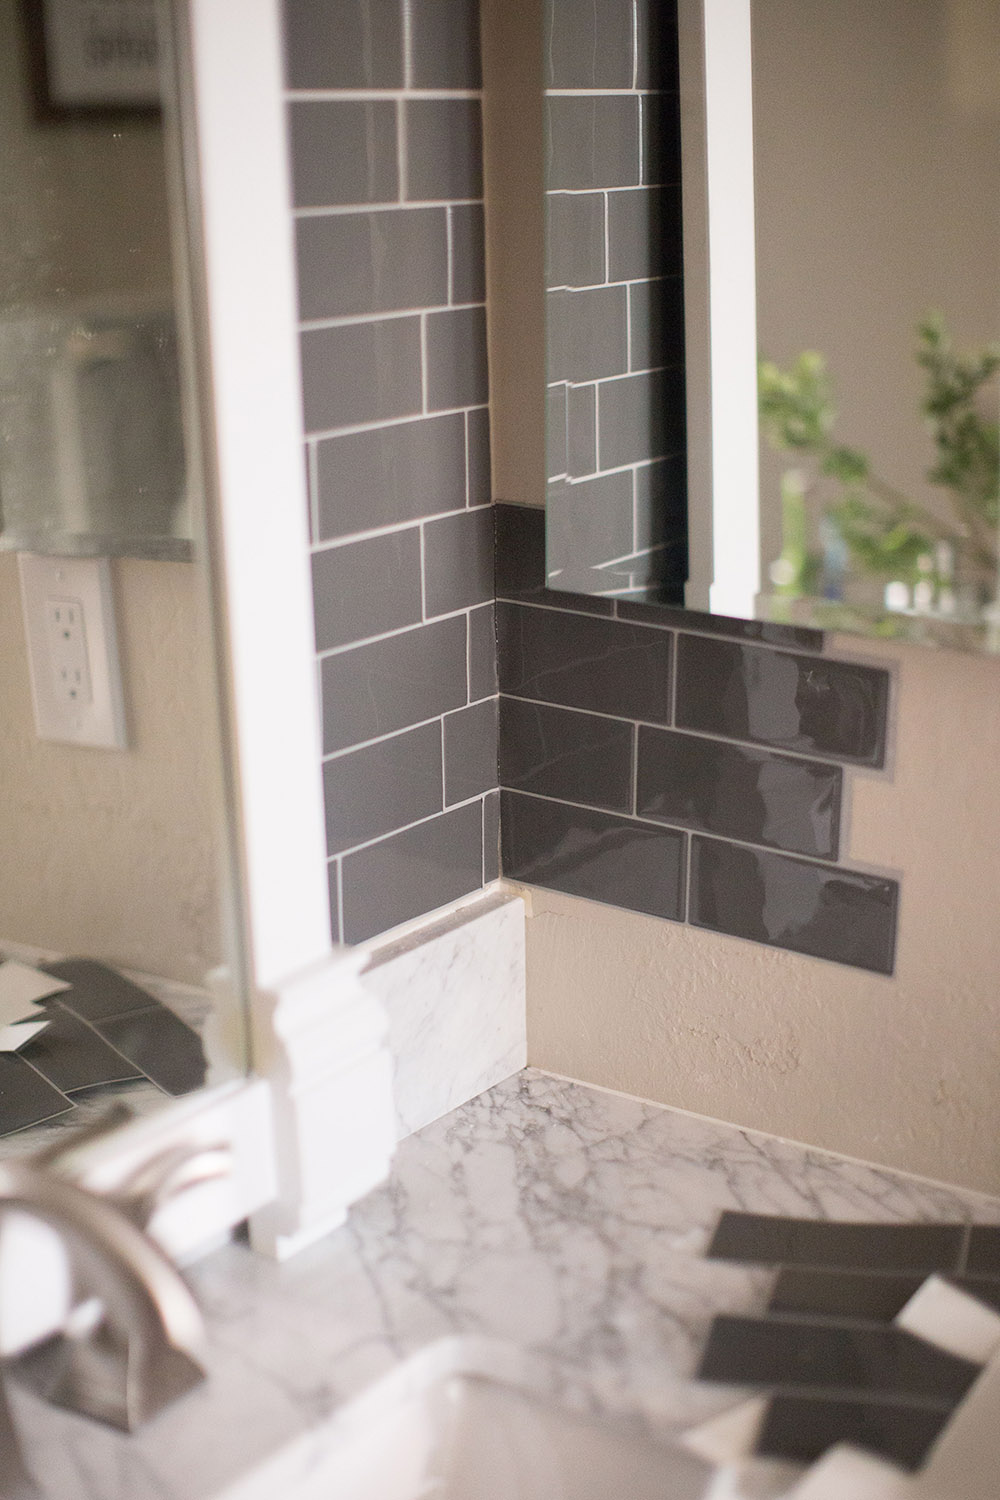 Transform Your Bathroom With Peel and Stick Tiles